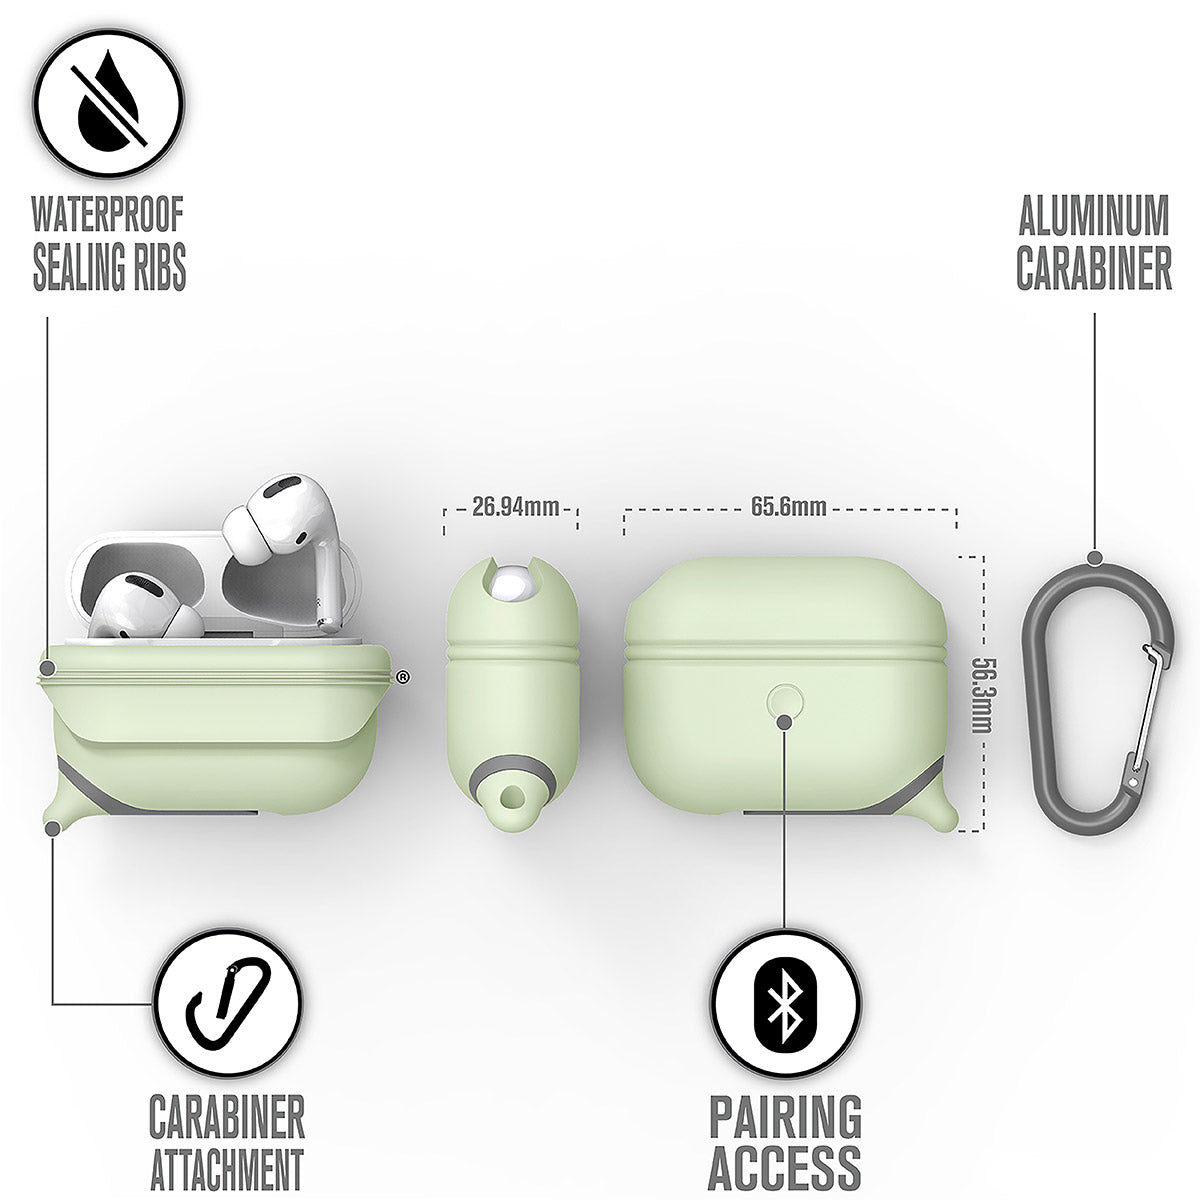 CATAPLAPDPROGITD | catalyst airpods pro gen 2 1 waterproof case carabiner special edition glow in the dark different views showing the sealing ribs carabiner attachment loop and pairing access text reads waterproof sealing ribs aluminum carabiner carabiner attachment pairing access